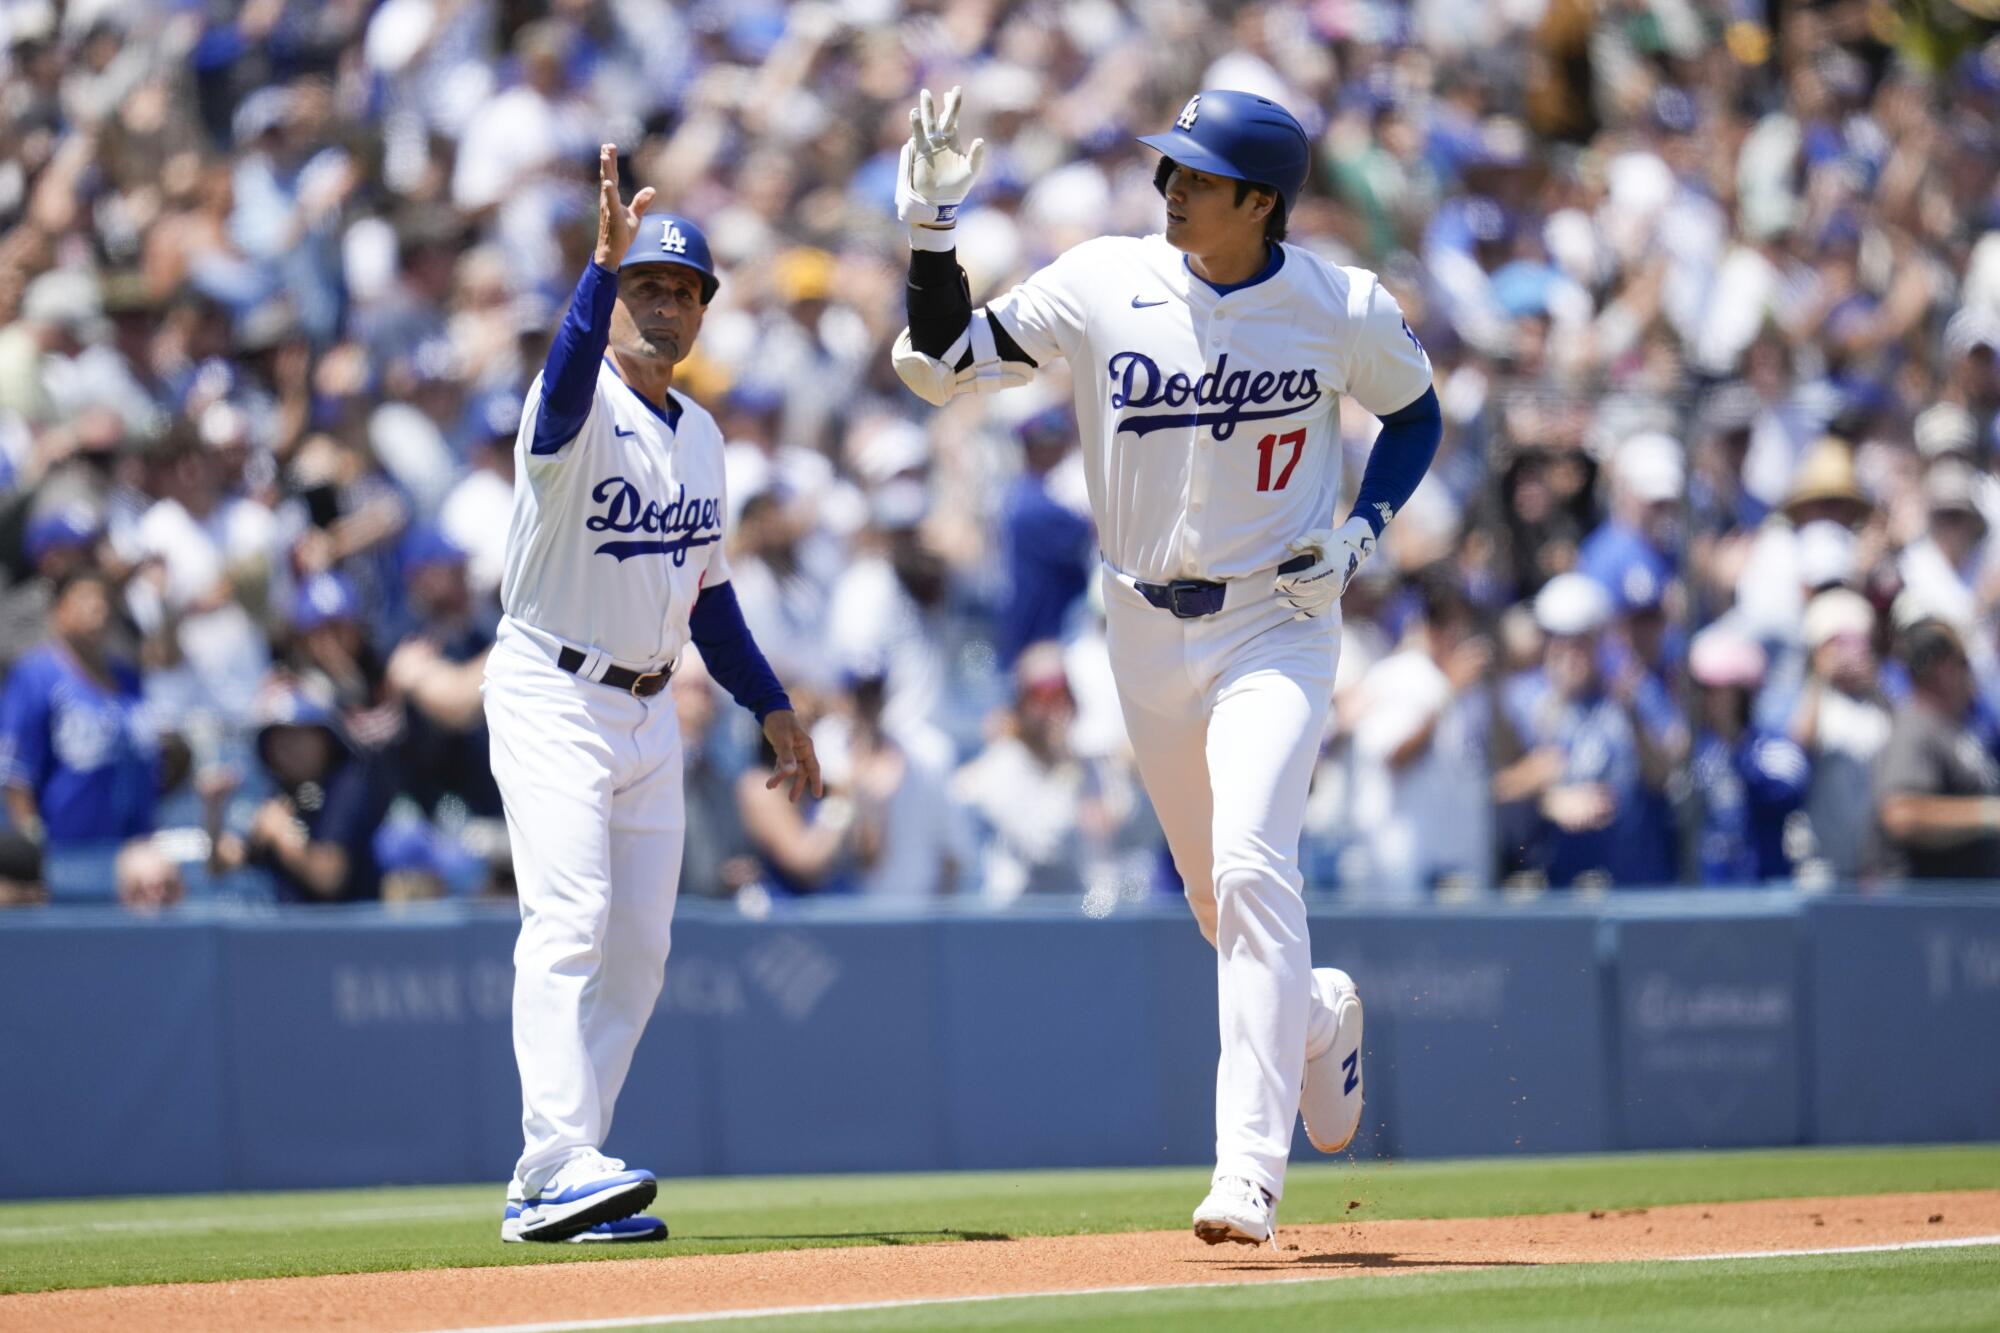 Shohei Ohtani runs past Dodgers third base coach Dino Ebel after hitting a home run in the first inning Sunday.